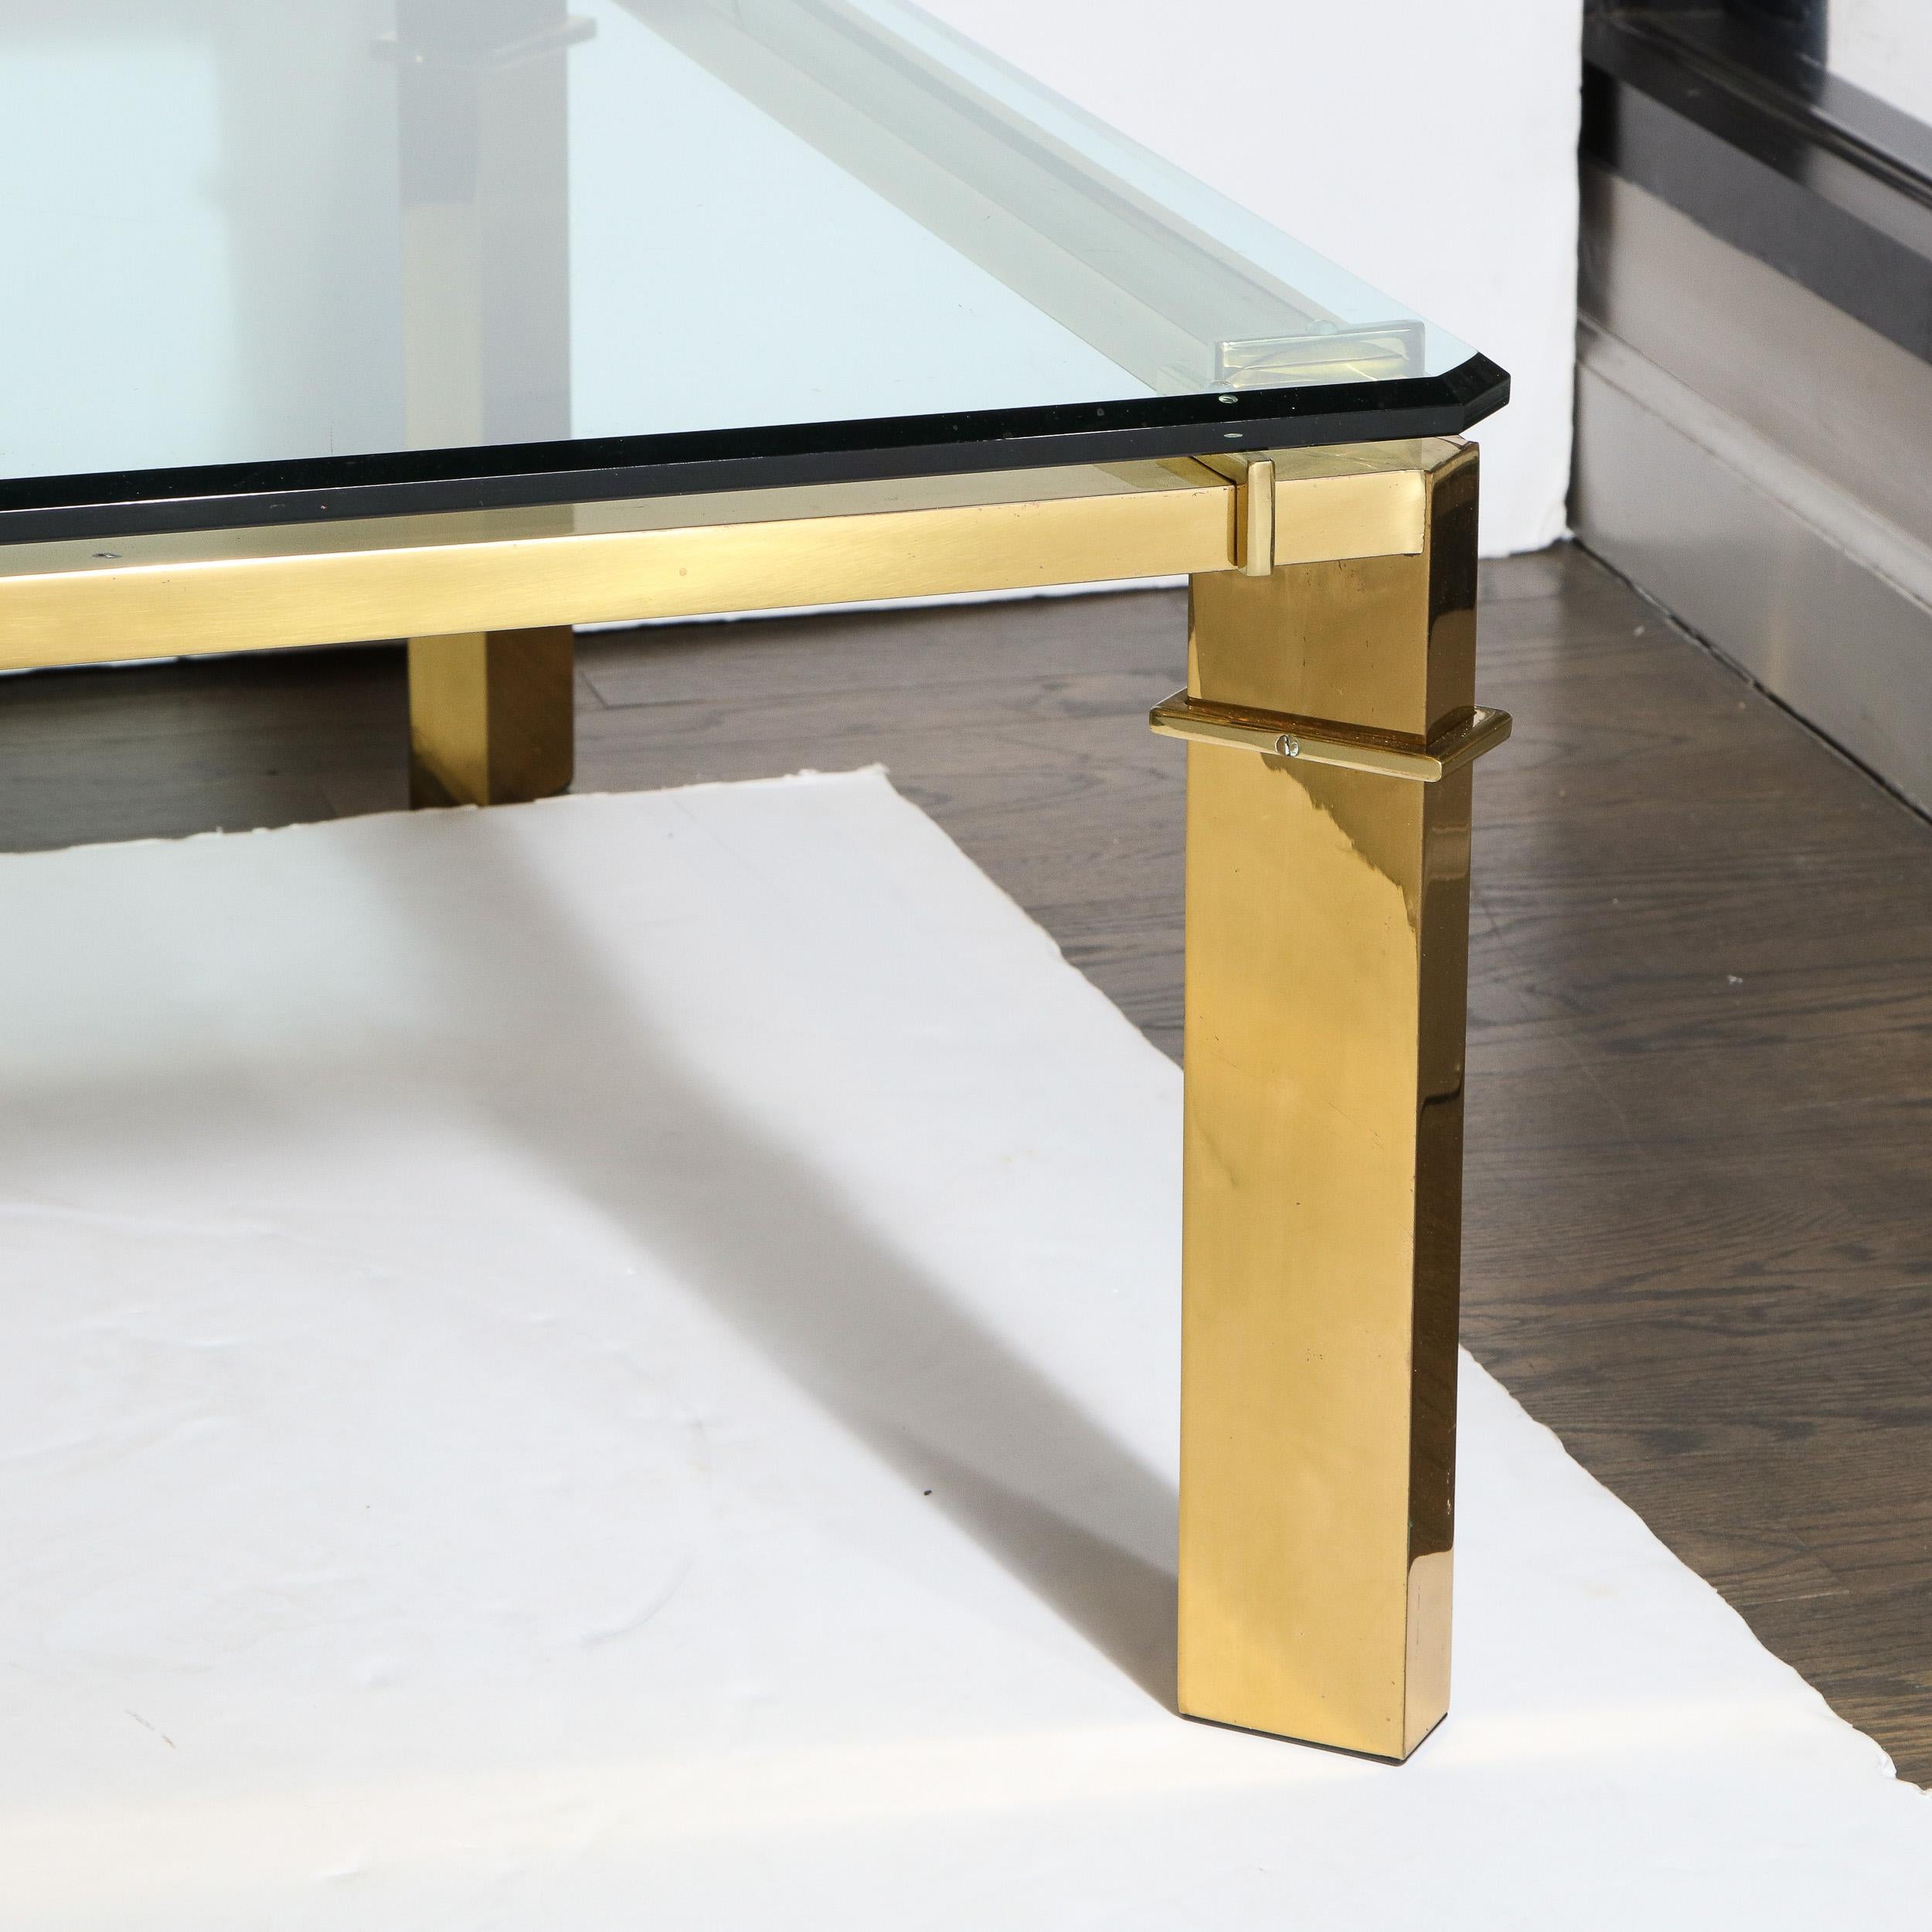 This bold and refined Mid-Century Modern cocktail table was realized in the United States circa 1970. It features volumetric rectangular legs that are positioned at a rotated 45 degree angle in relation to the rectangular form translucent glass top